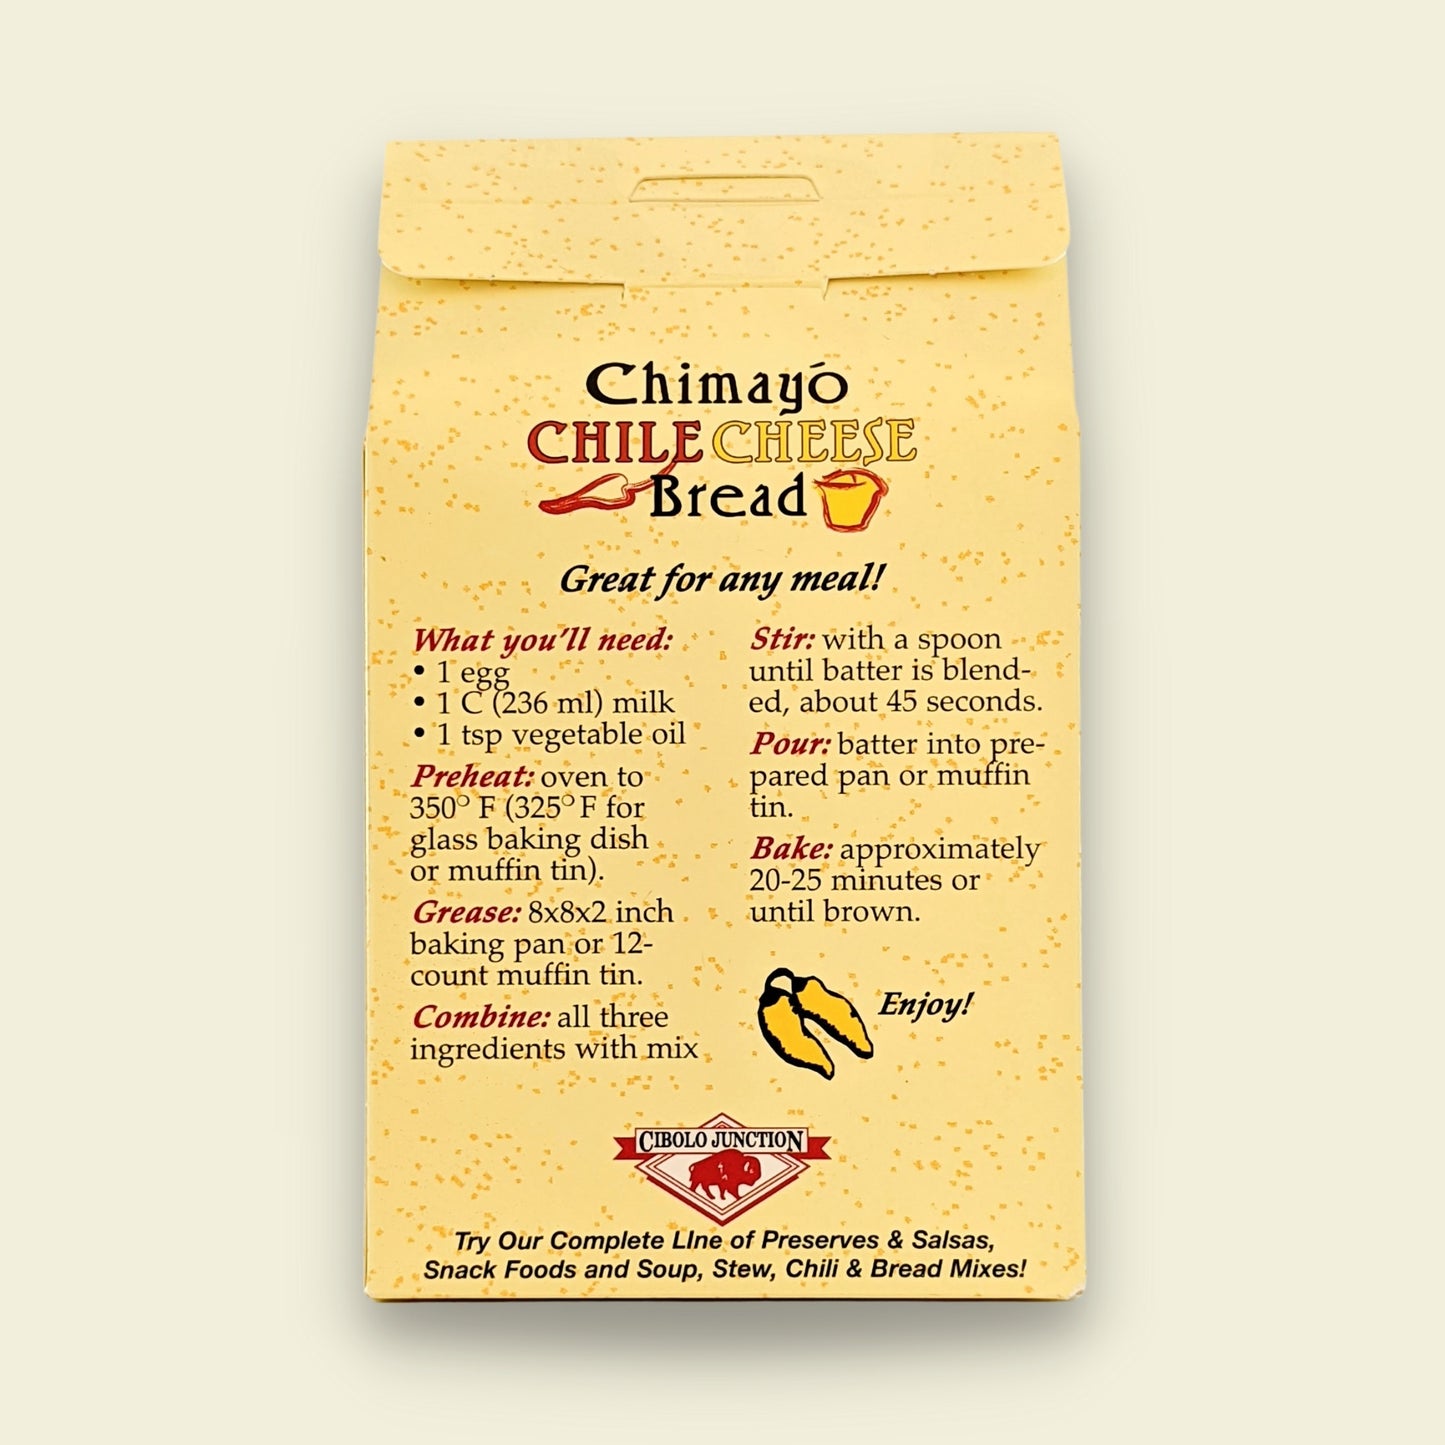 Chimayo Chile Cheese Bread Mix (Case of 12)